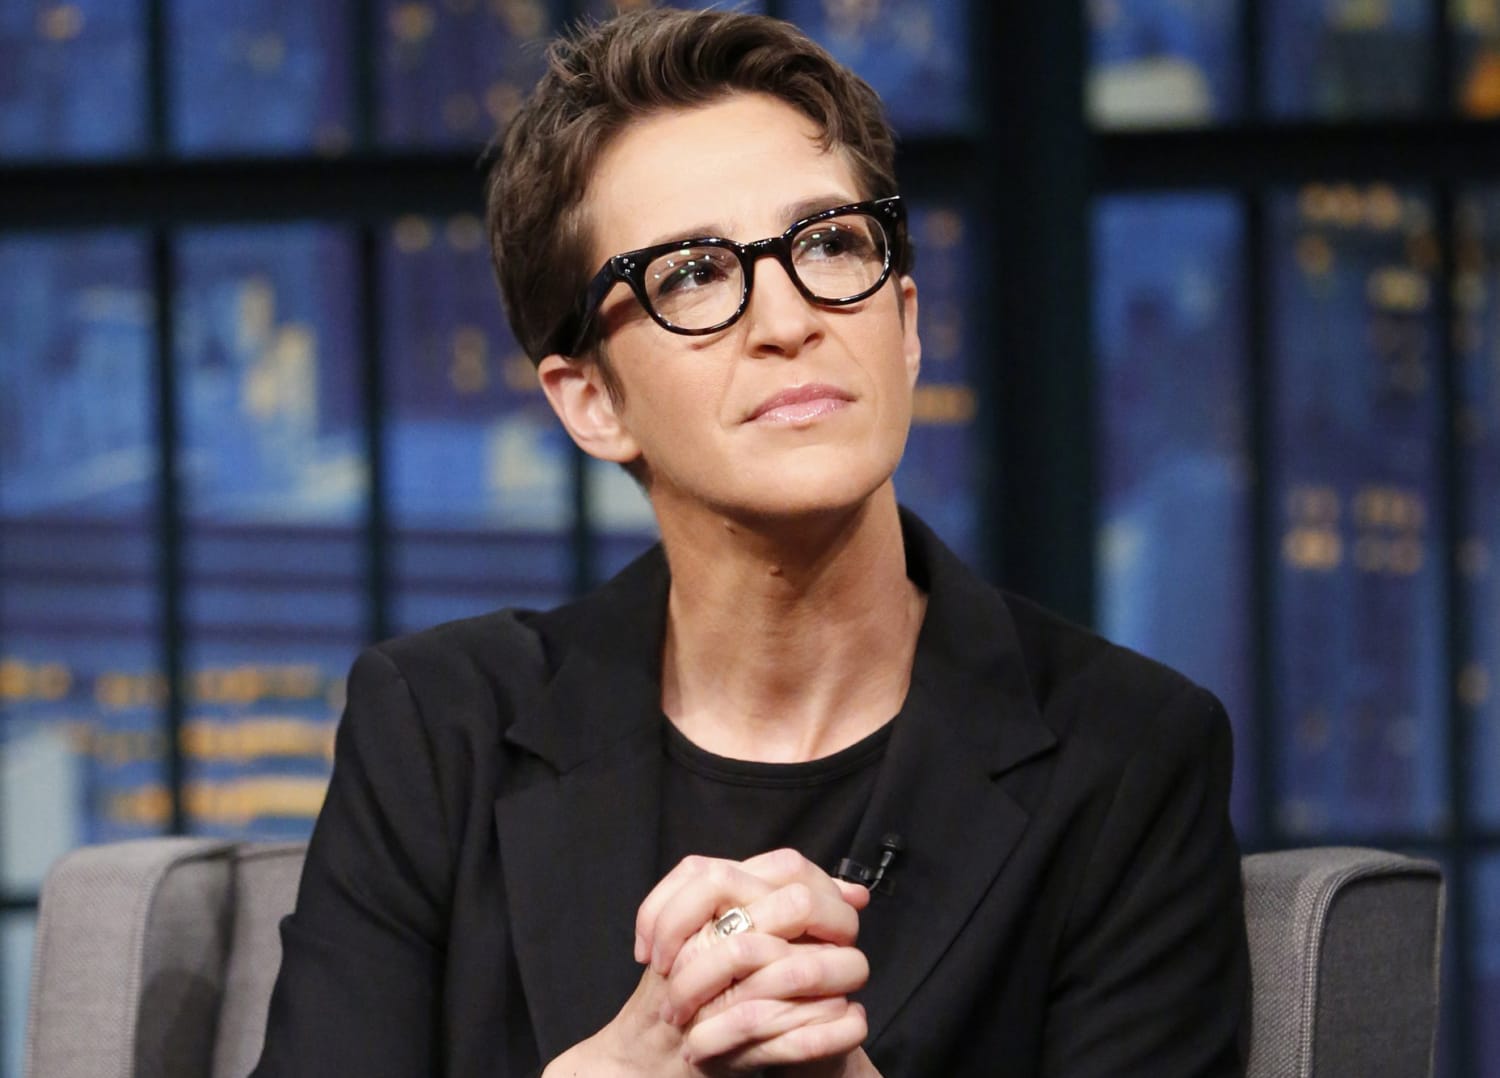 Rachel Maddow says she had surgery for skin cancer after partner saw change...